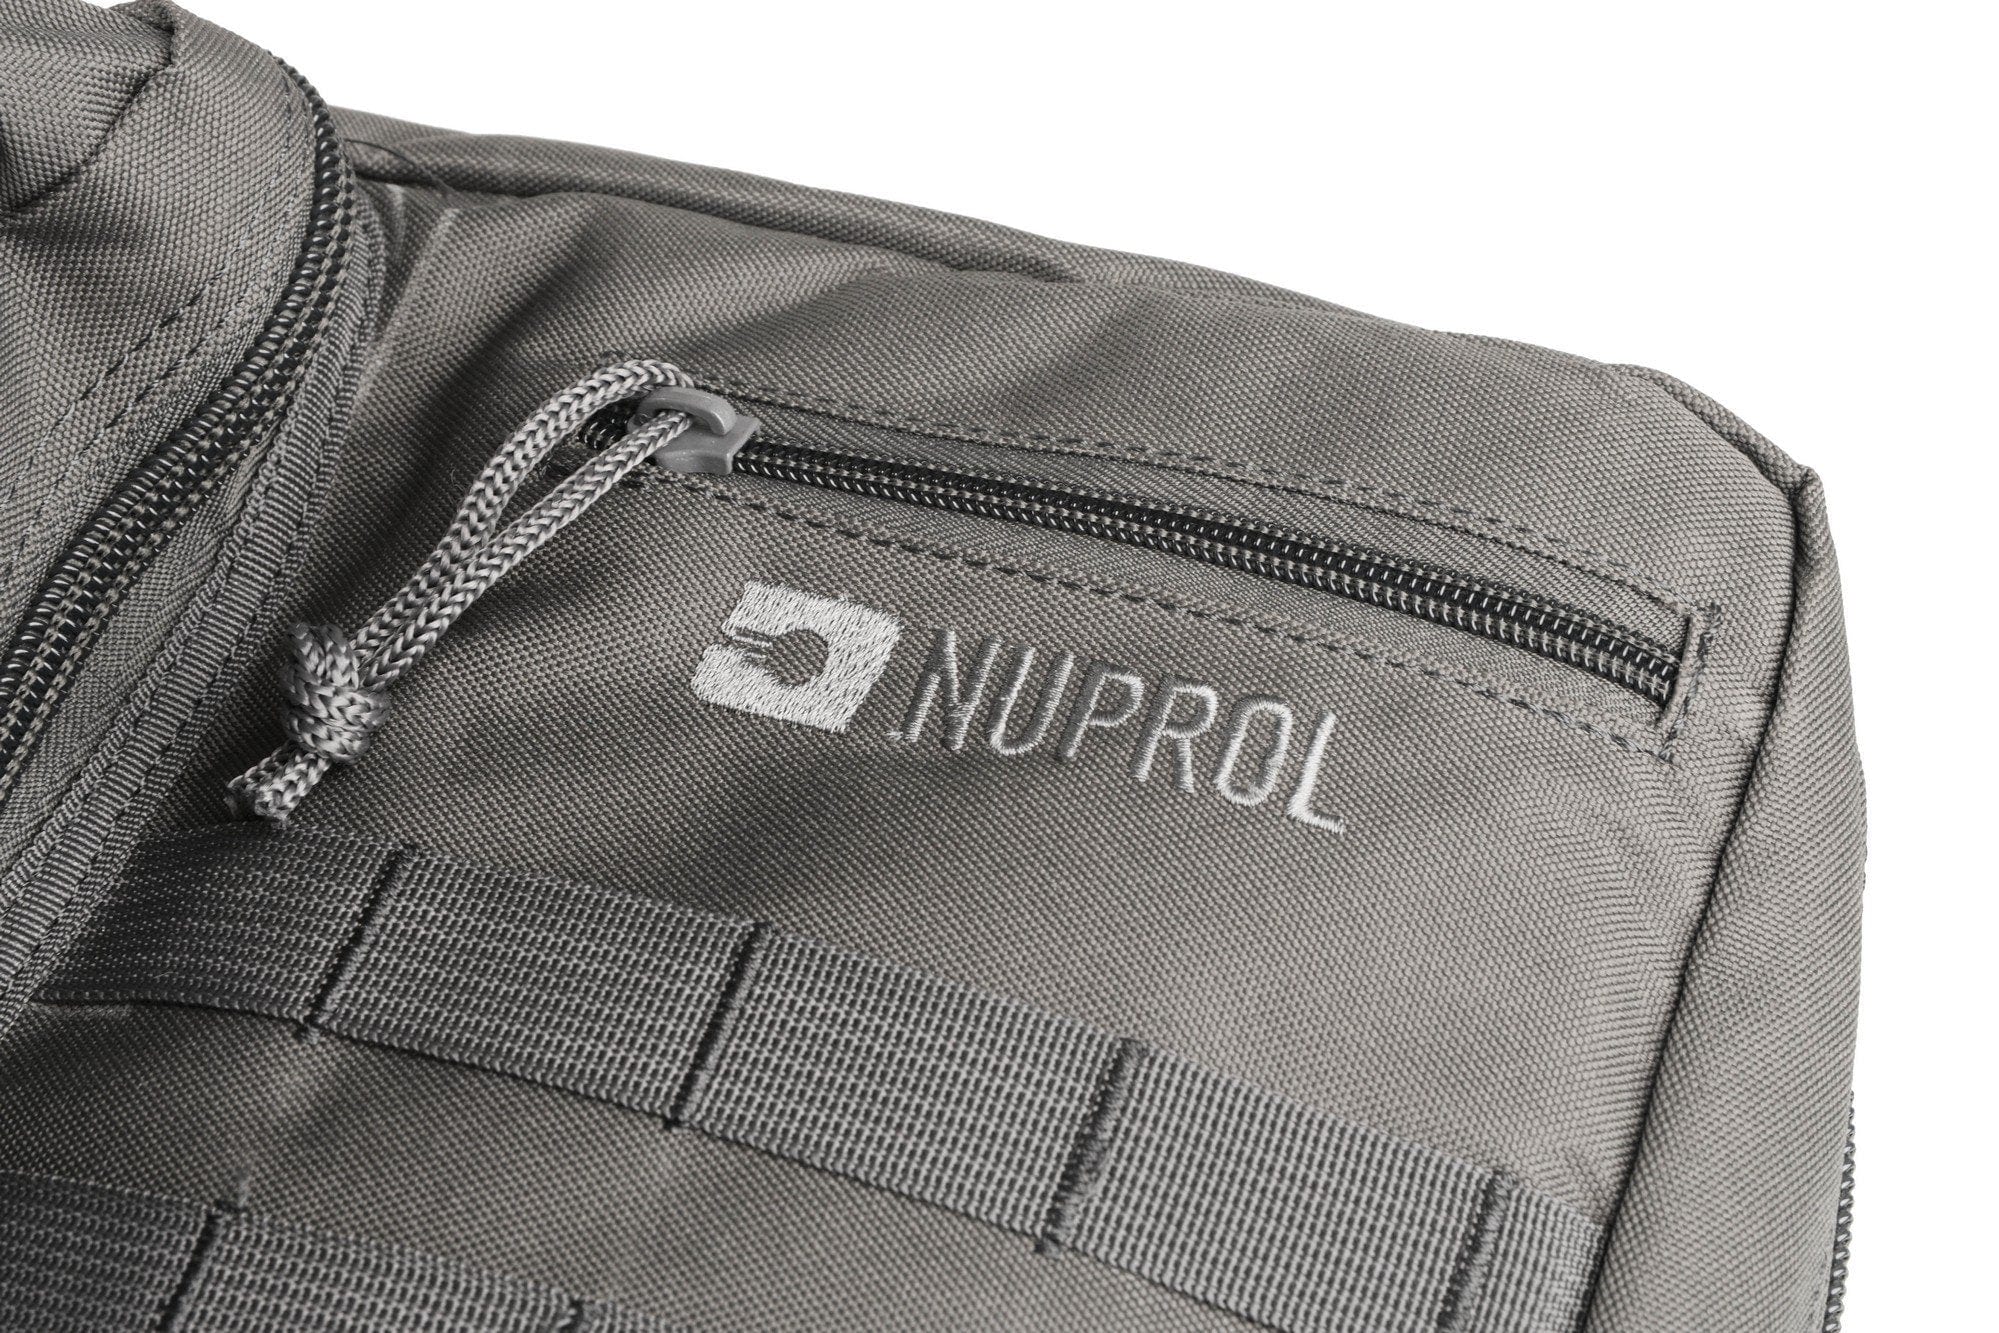 Double gun bag NBS 1000mm - gray by Nuprol on Airsoft Mania Europe